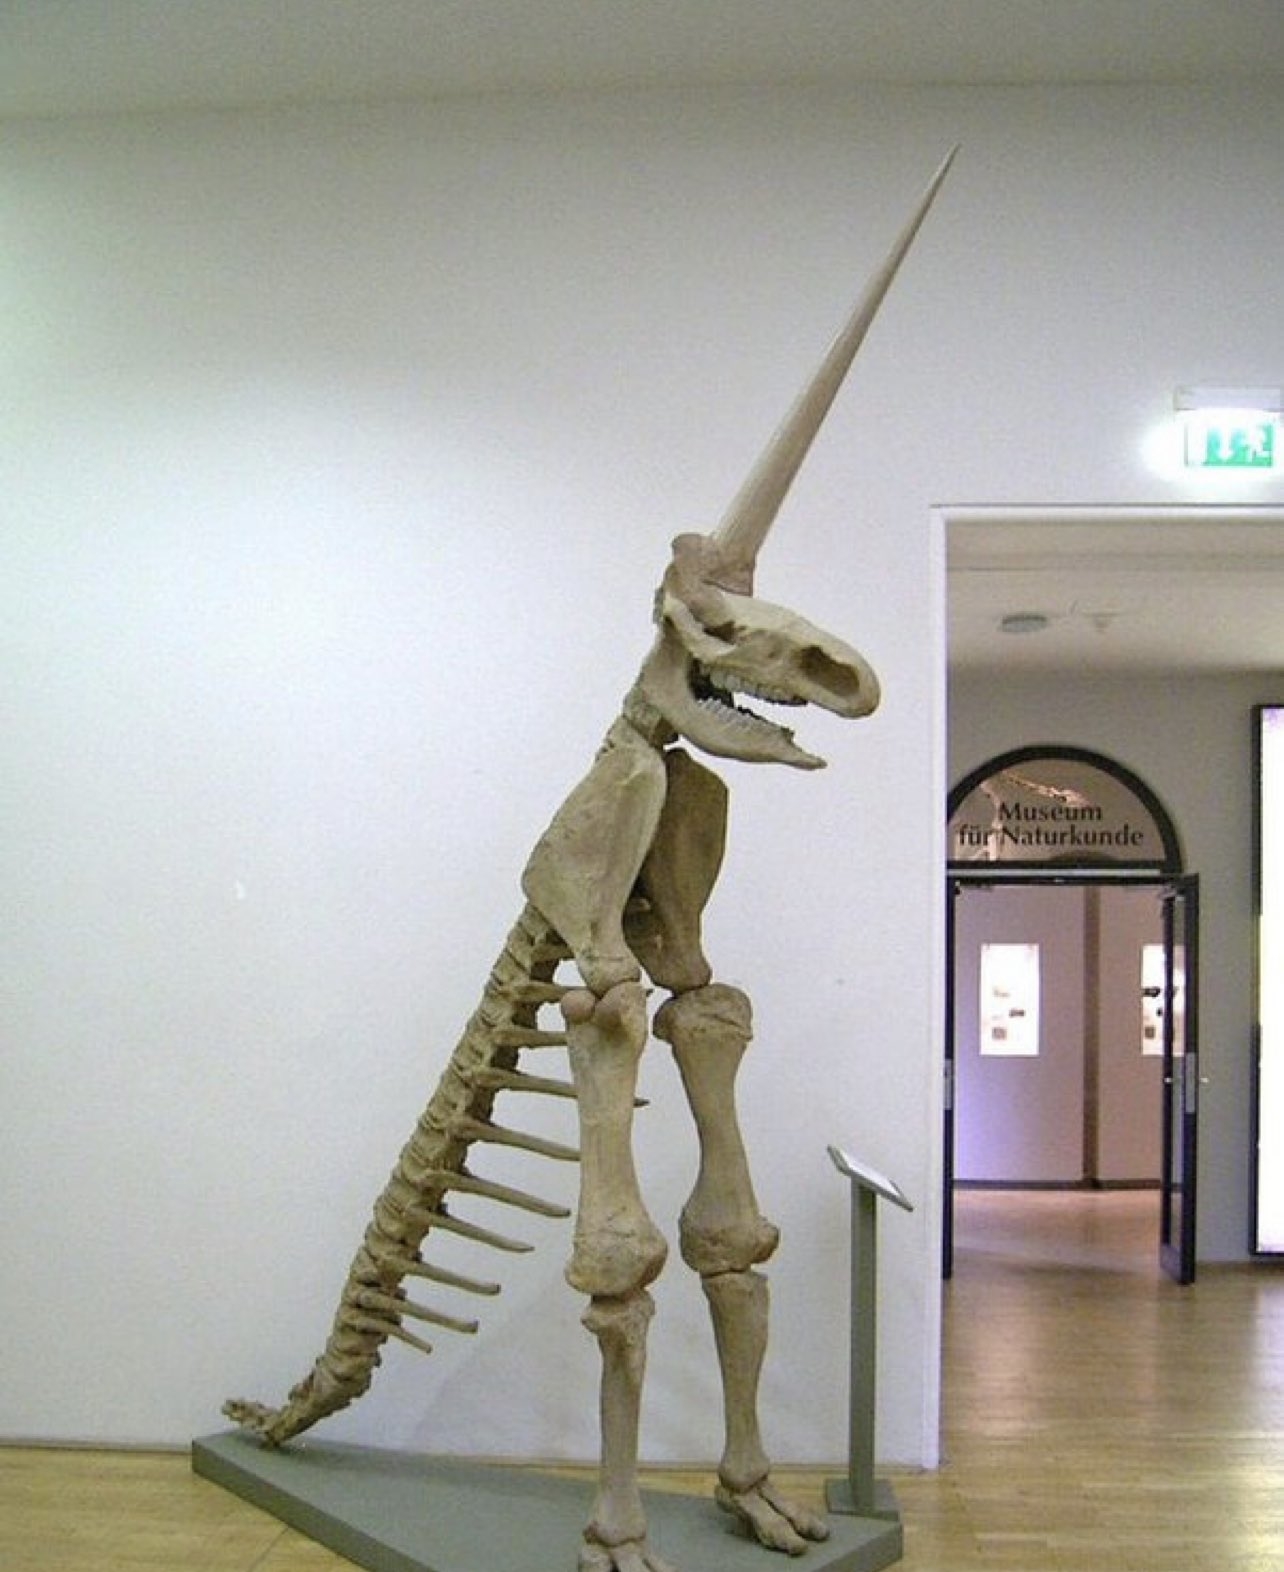 An upright skeleton showing a long spinal column, long front legs, rhino skull, and very long, thin horn